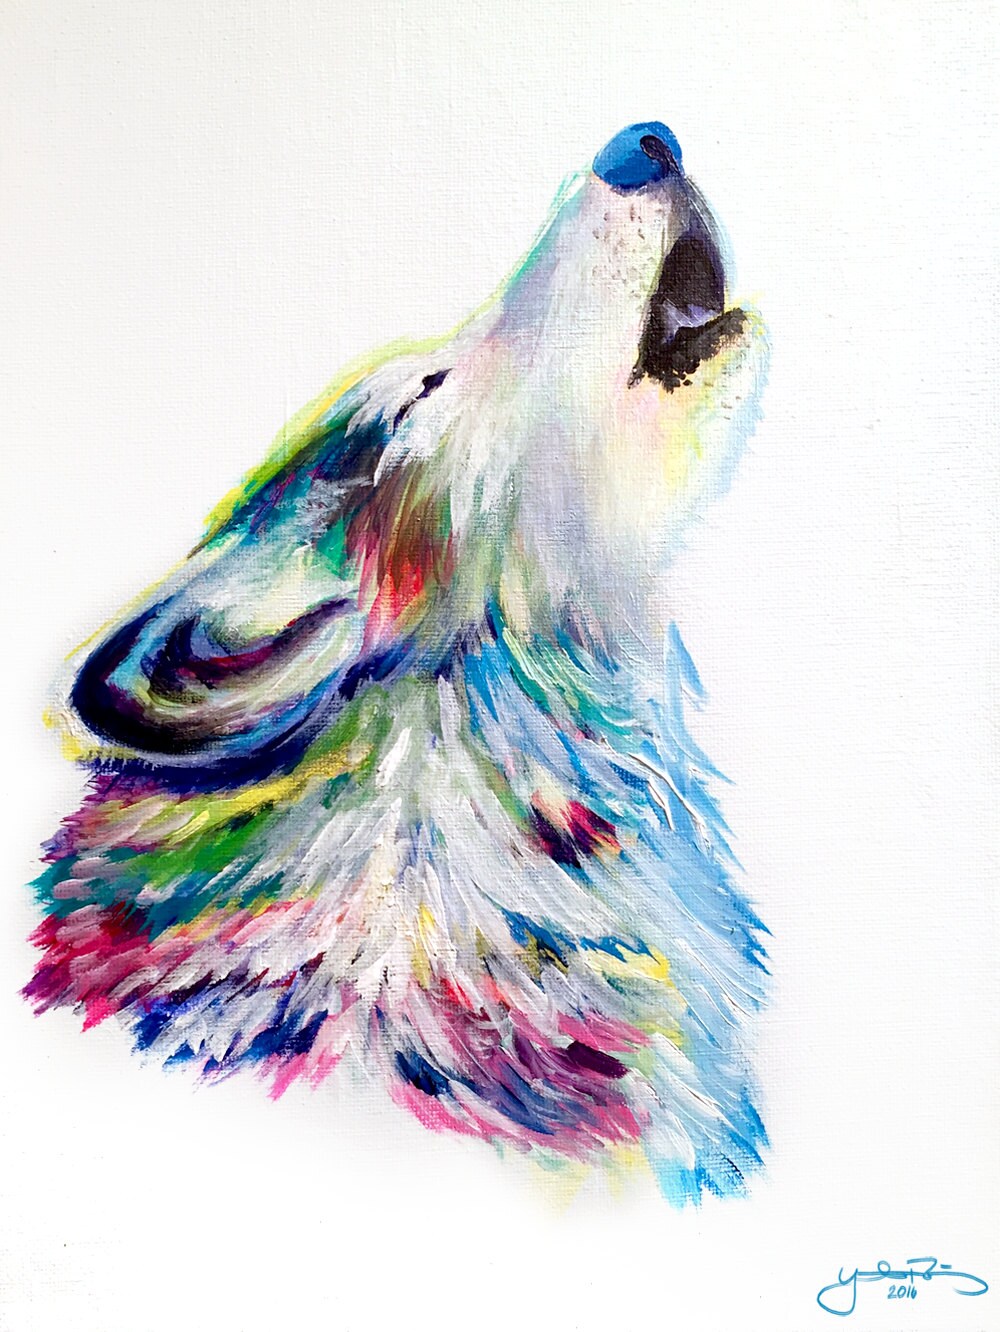 wolf howling painting